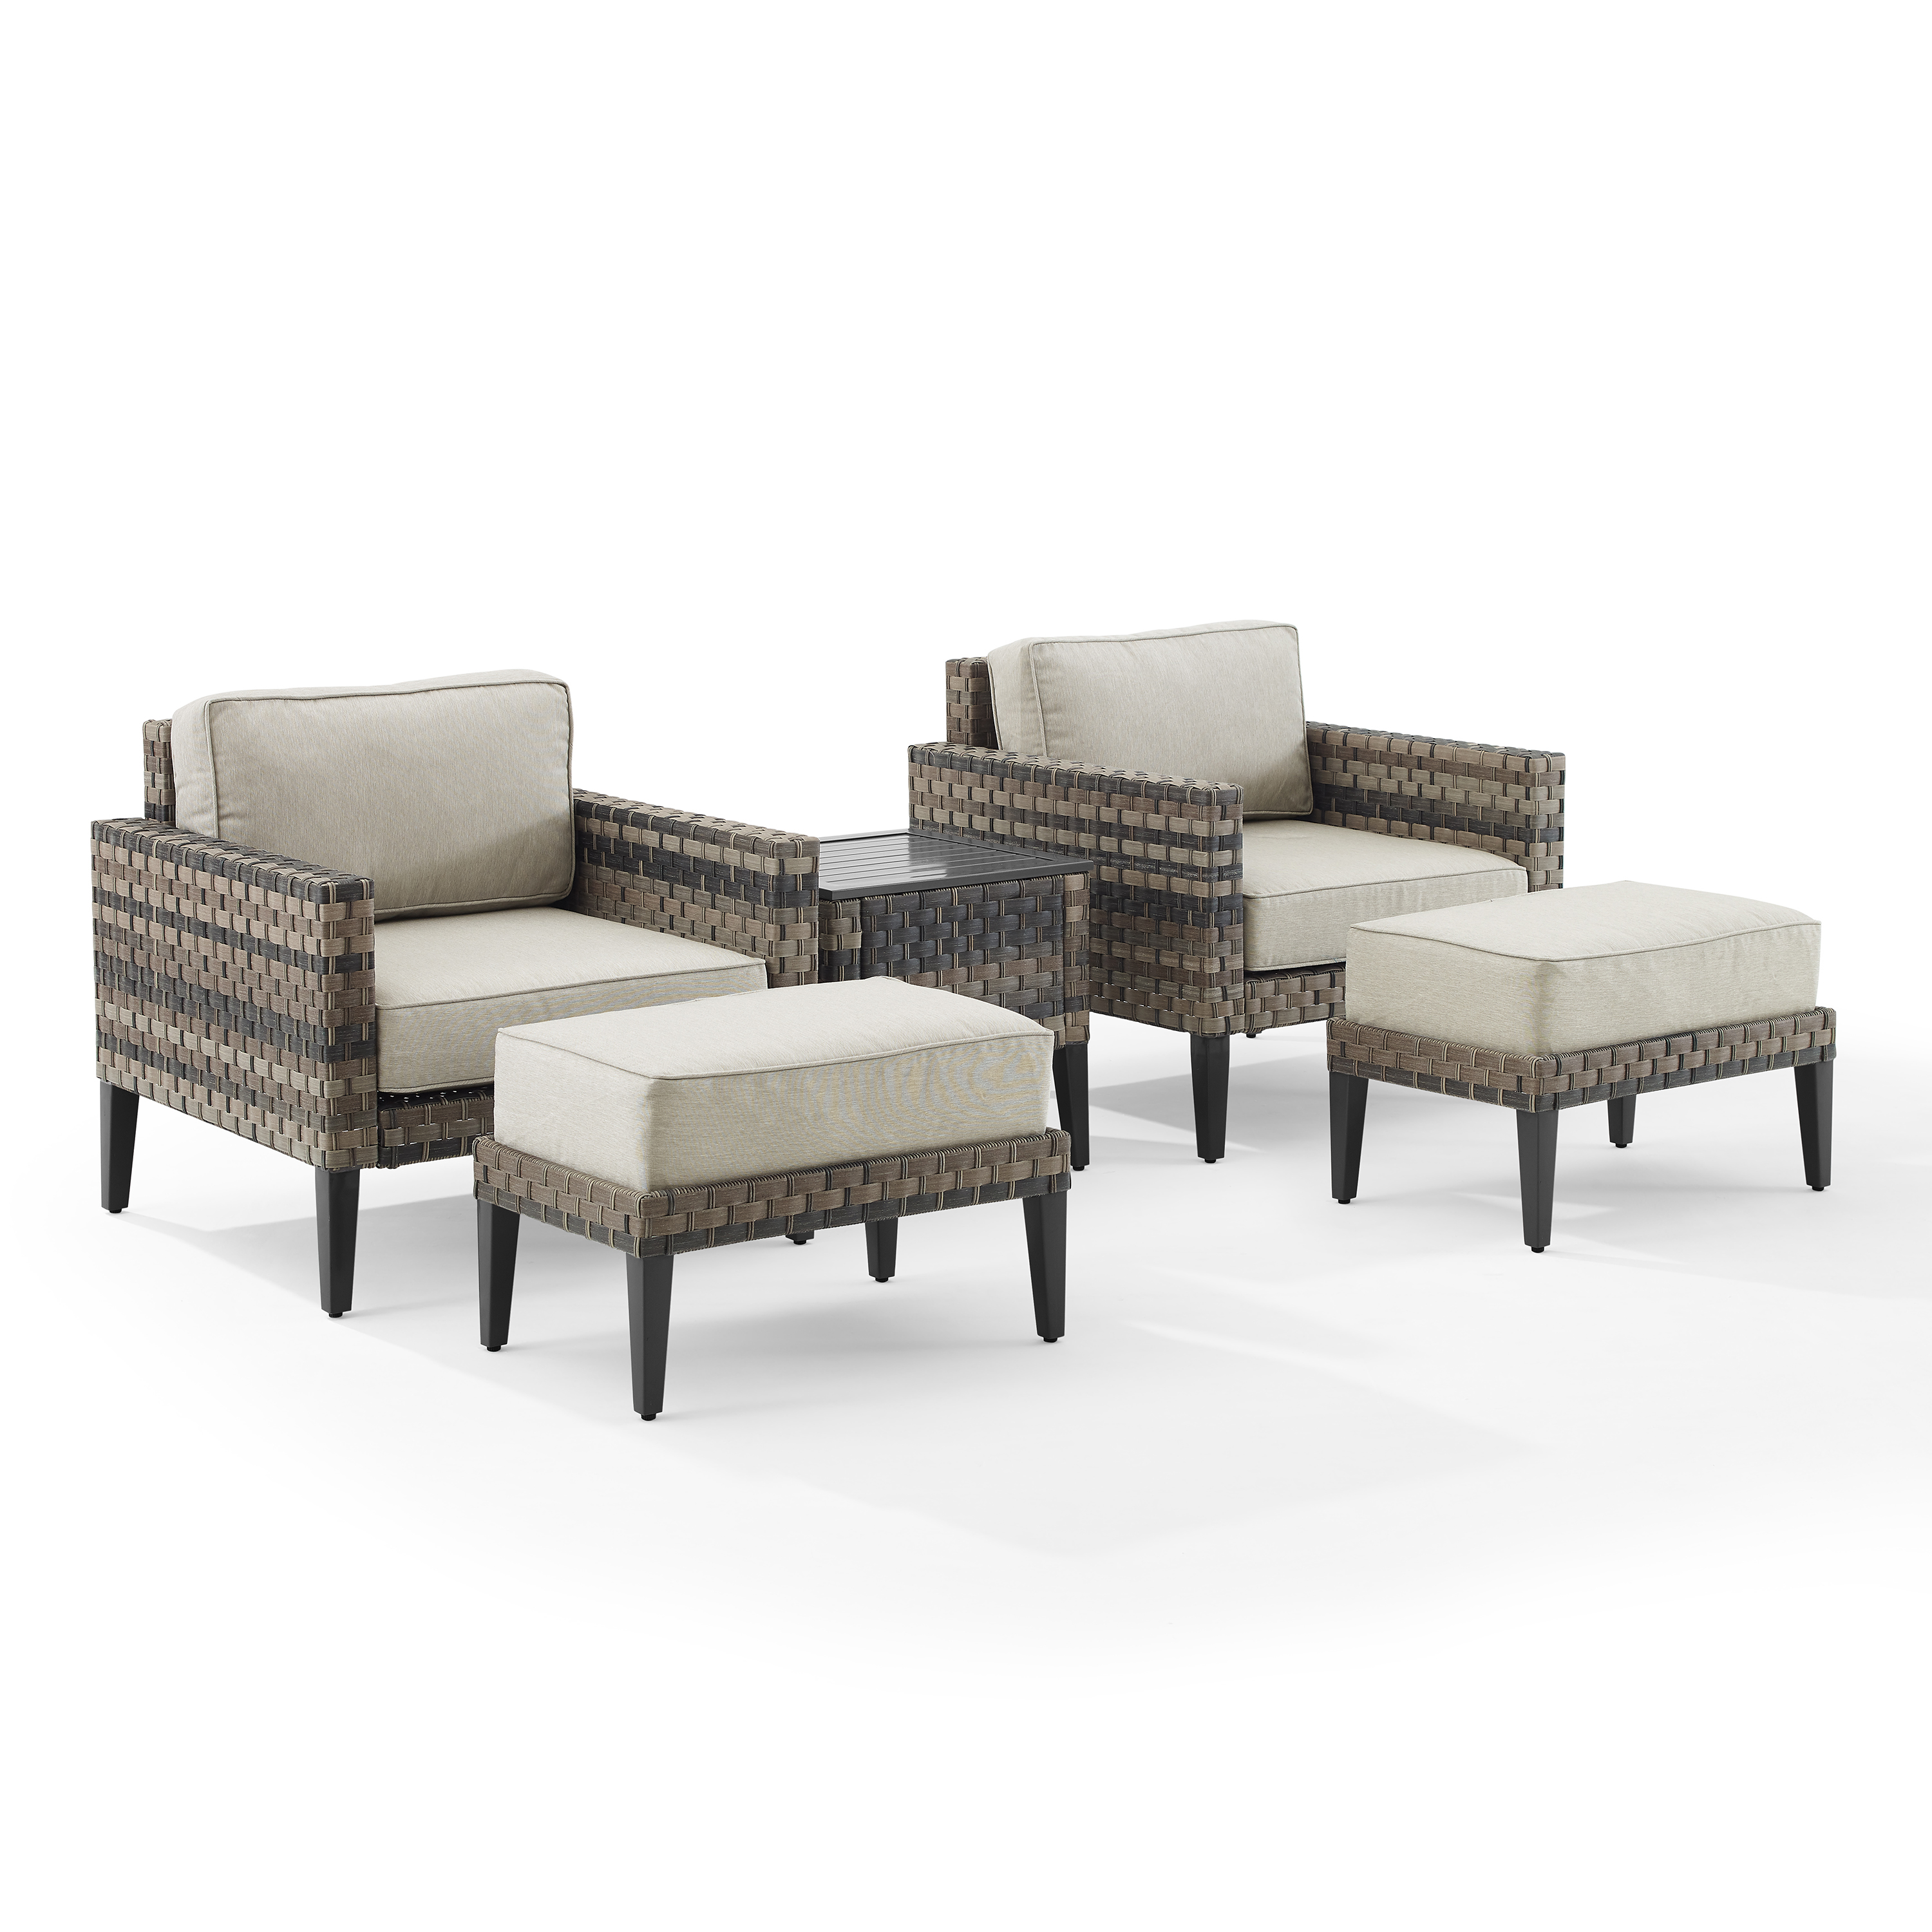 Crosley Furniture Prescott 5Pc Outdoor Wicker Armchair Set Taupe/Brown - Side Table, 2 Armchairs, & 2 Ottomans - image 1 of 18